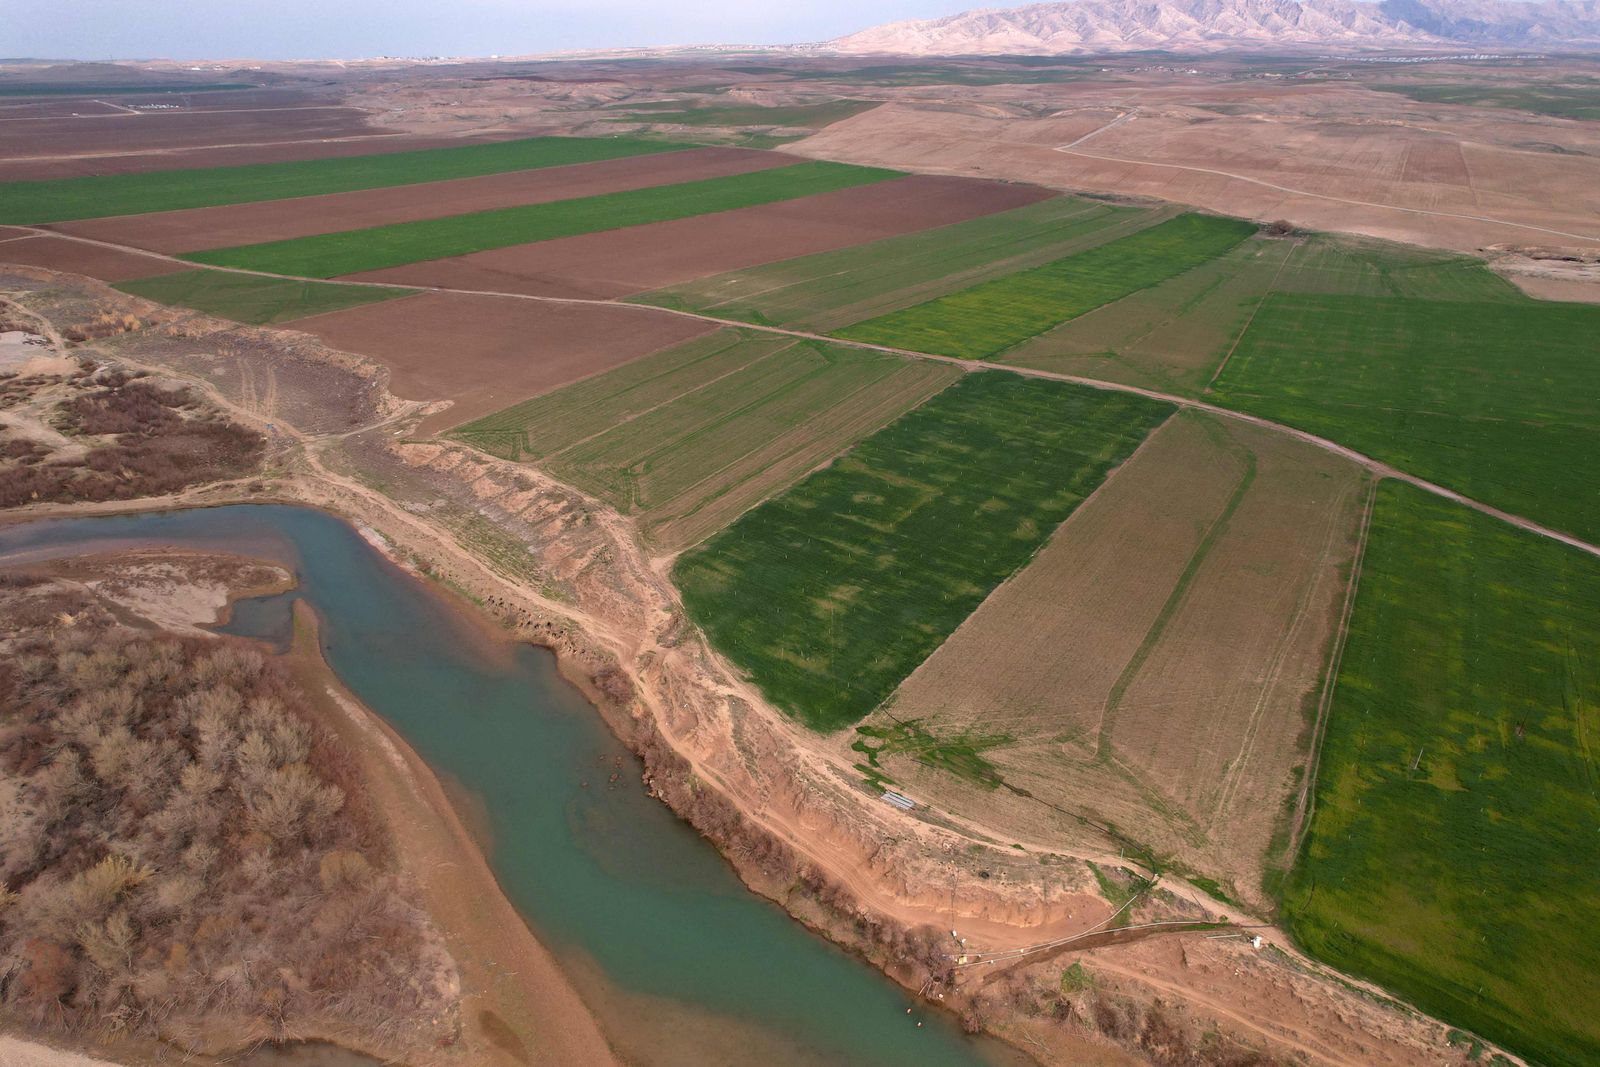 This aerial picture shows a view of the Tigris river, in the village of Bajid Kandala, some 50km west of the northern Iraqi city of Dohuk, on February 18, 2022. - The Tigris is one of Iraq's two big rivers that gave birth to the ancient empires of Sumer and Babylonia and are said to have watered the biblical Garden of Eden. Today, it is dying.Human activity and climate change have choked the once mighty stream that, with its twin the Euphrates, brought to life the civilisations of Mesopotamia thousands of years ago. (Photo by Ismael ADNAN / AFP) - AFP